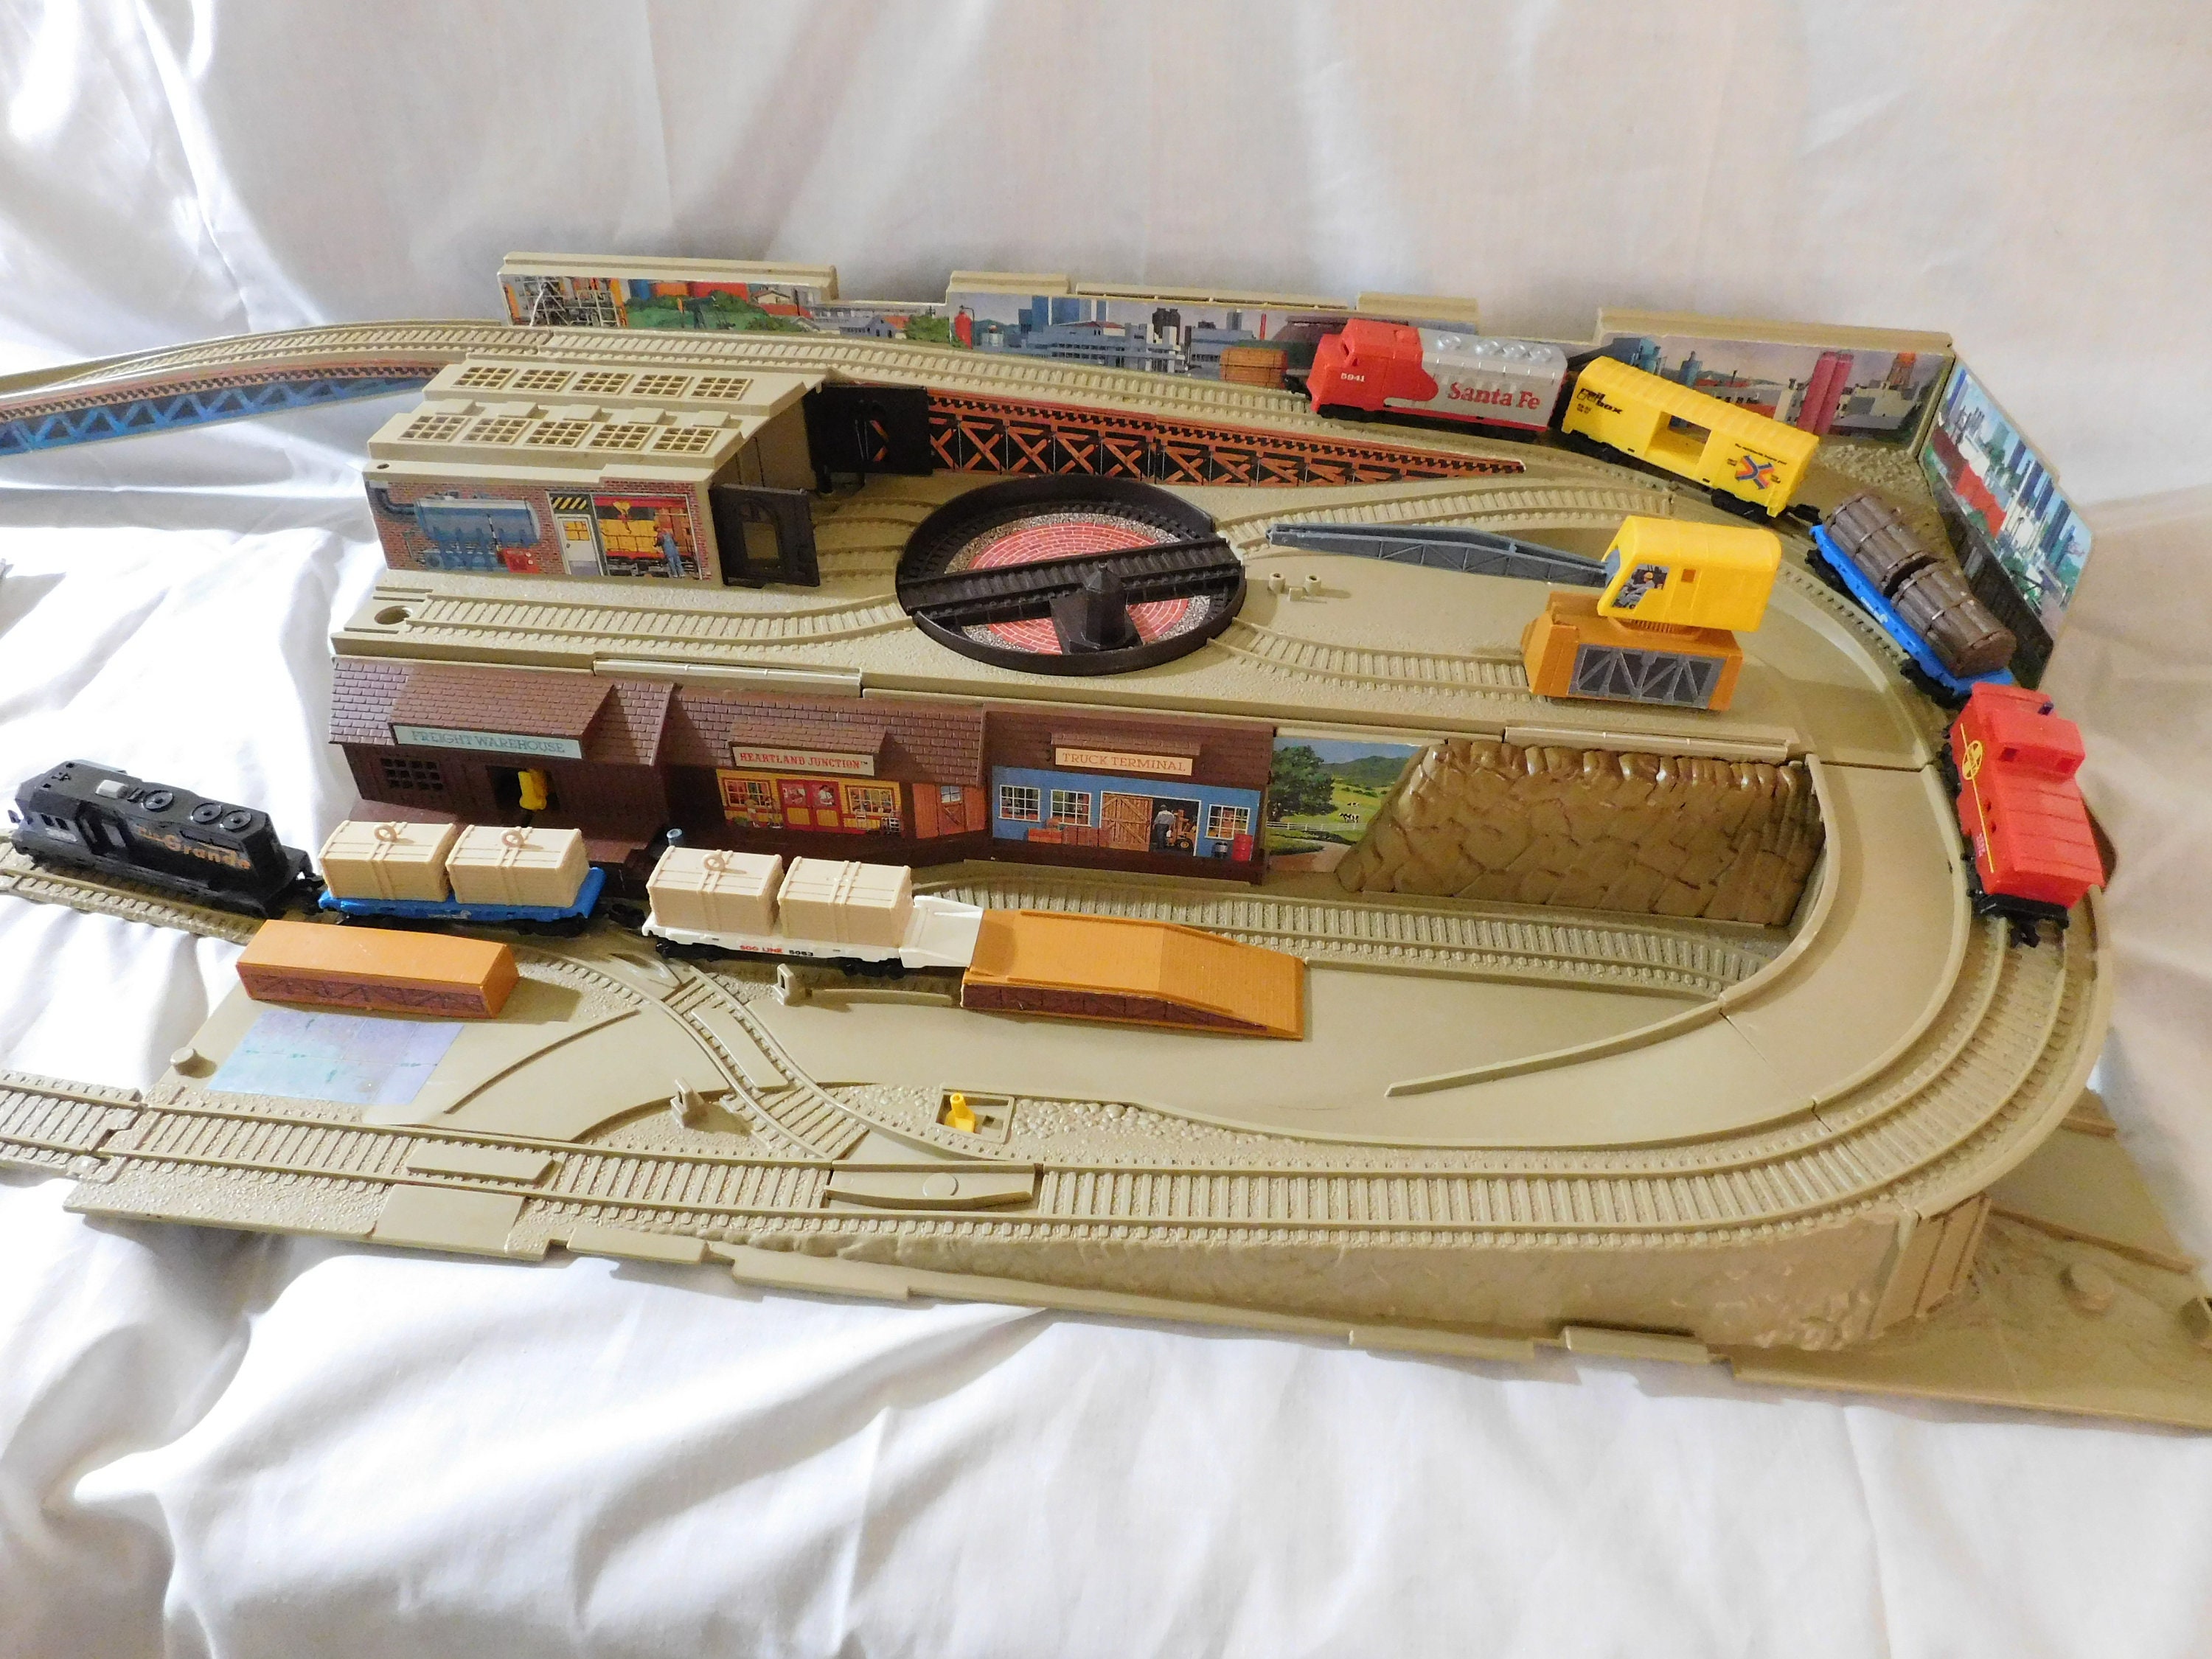 1983 Railroad Freight Yard, Mattel Hot Wheels, Sto And Go Set with trains